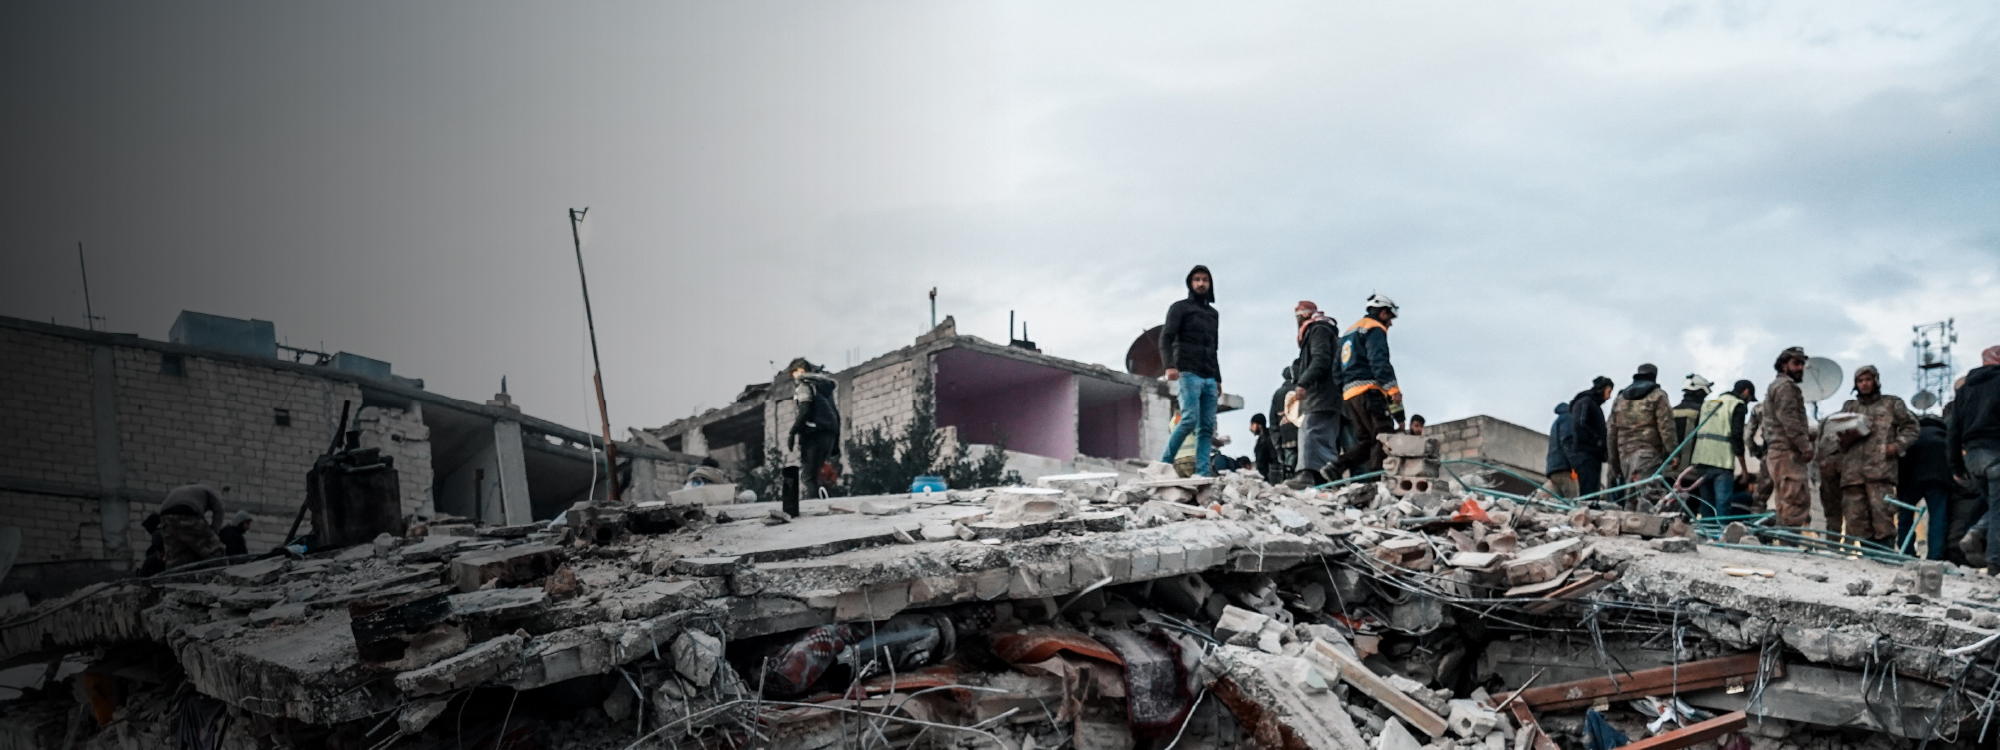 Rubble of collapsed buildings in Syria with people standing on them